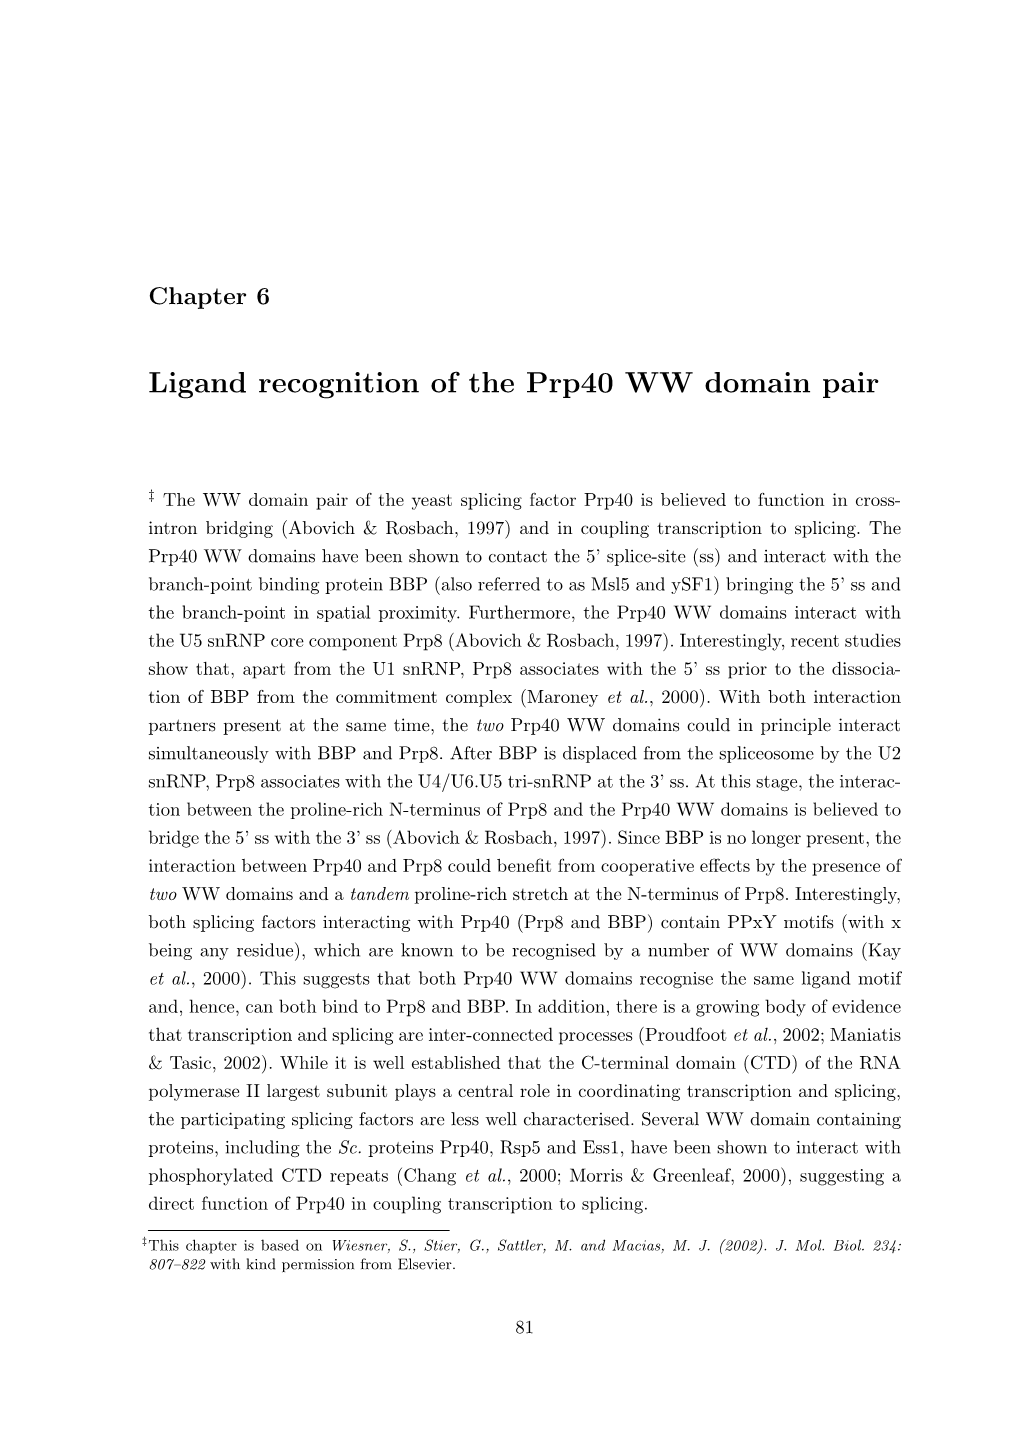 Ligand Recognition of the Prp40 WW Domain Pair